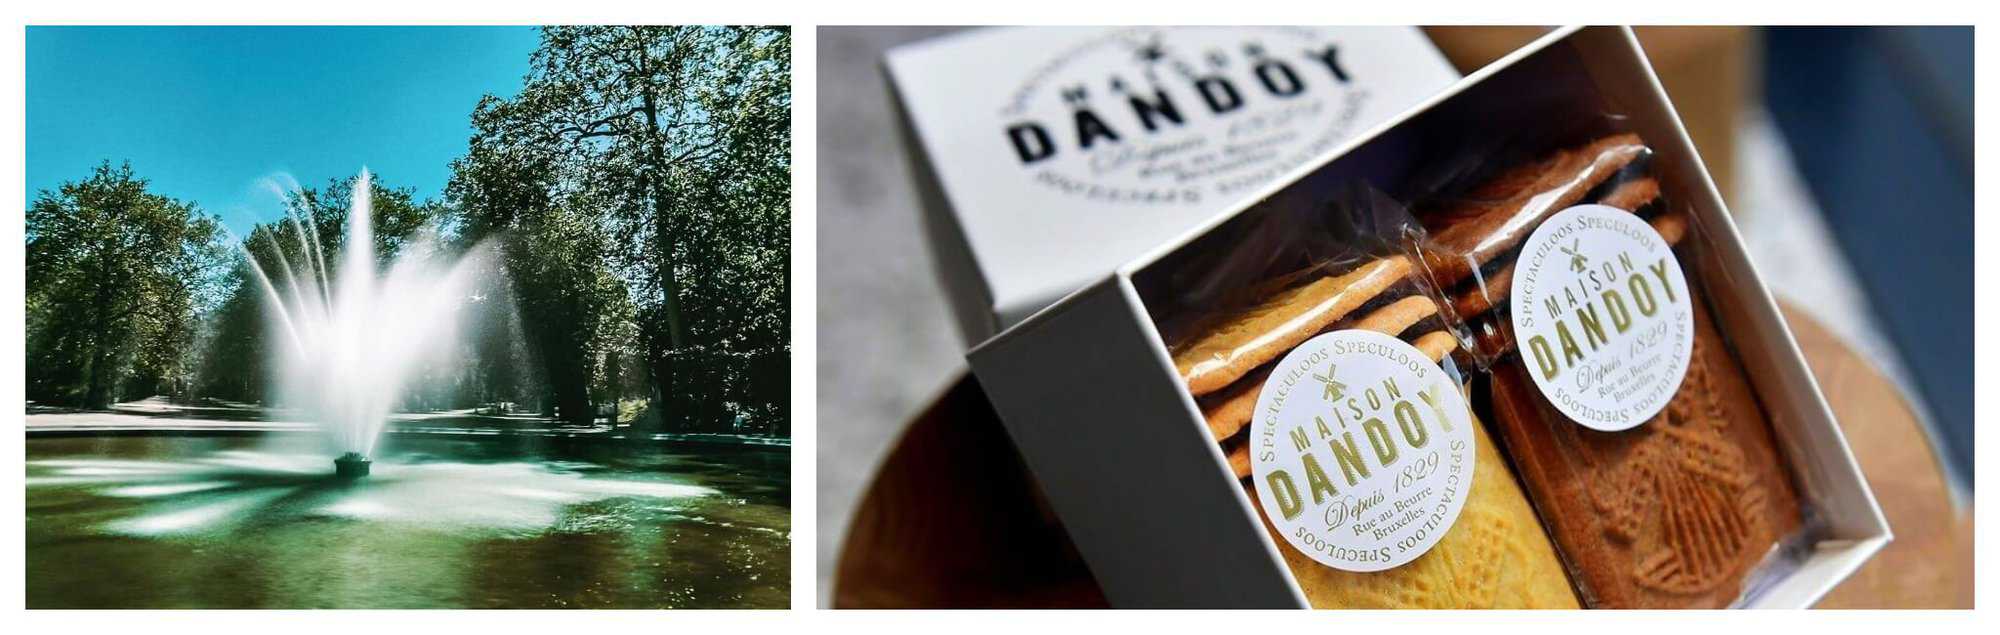 Left: A blue sky peeks out behind a large water fountain inside Parc de Bruxelles Right: A white box from Maison Dandoy is photographed, with two types of speculoos biscuits inside